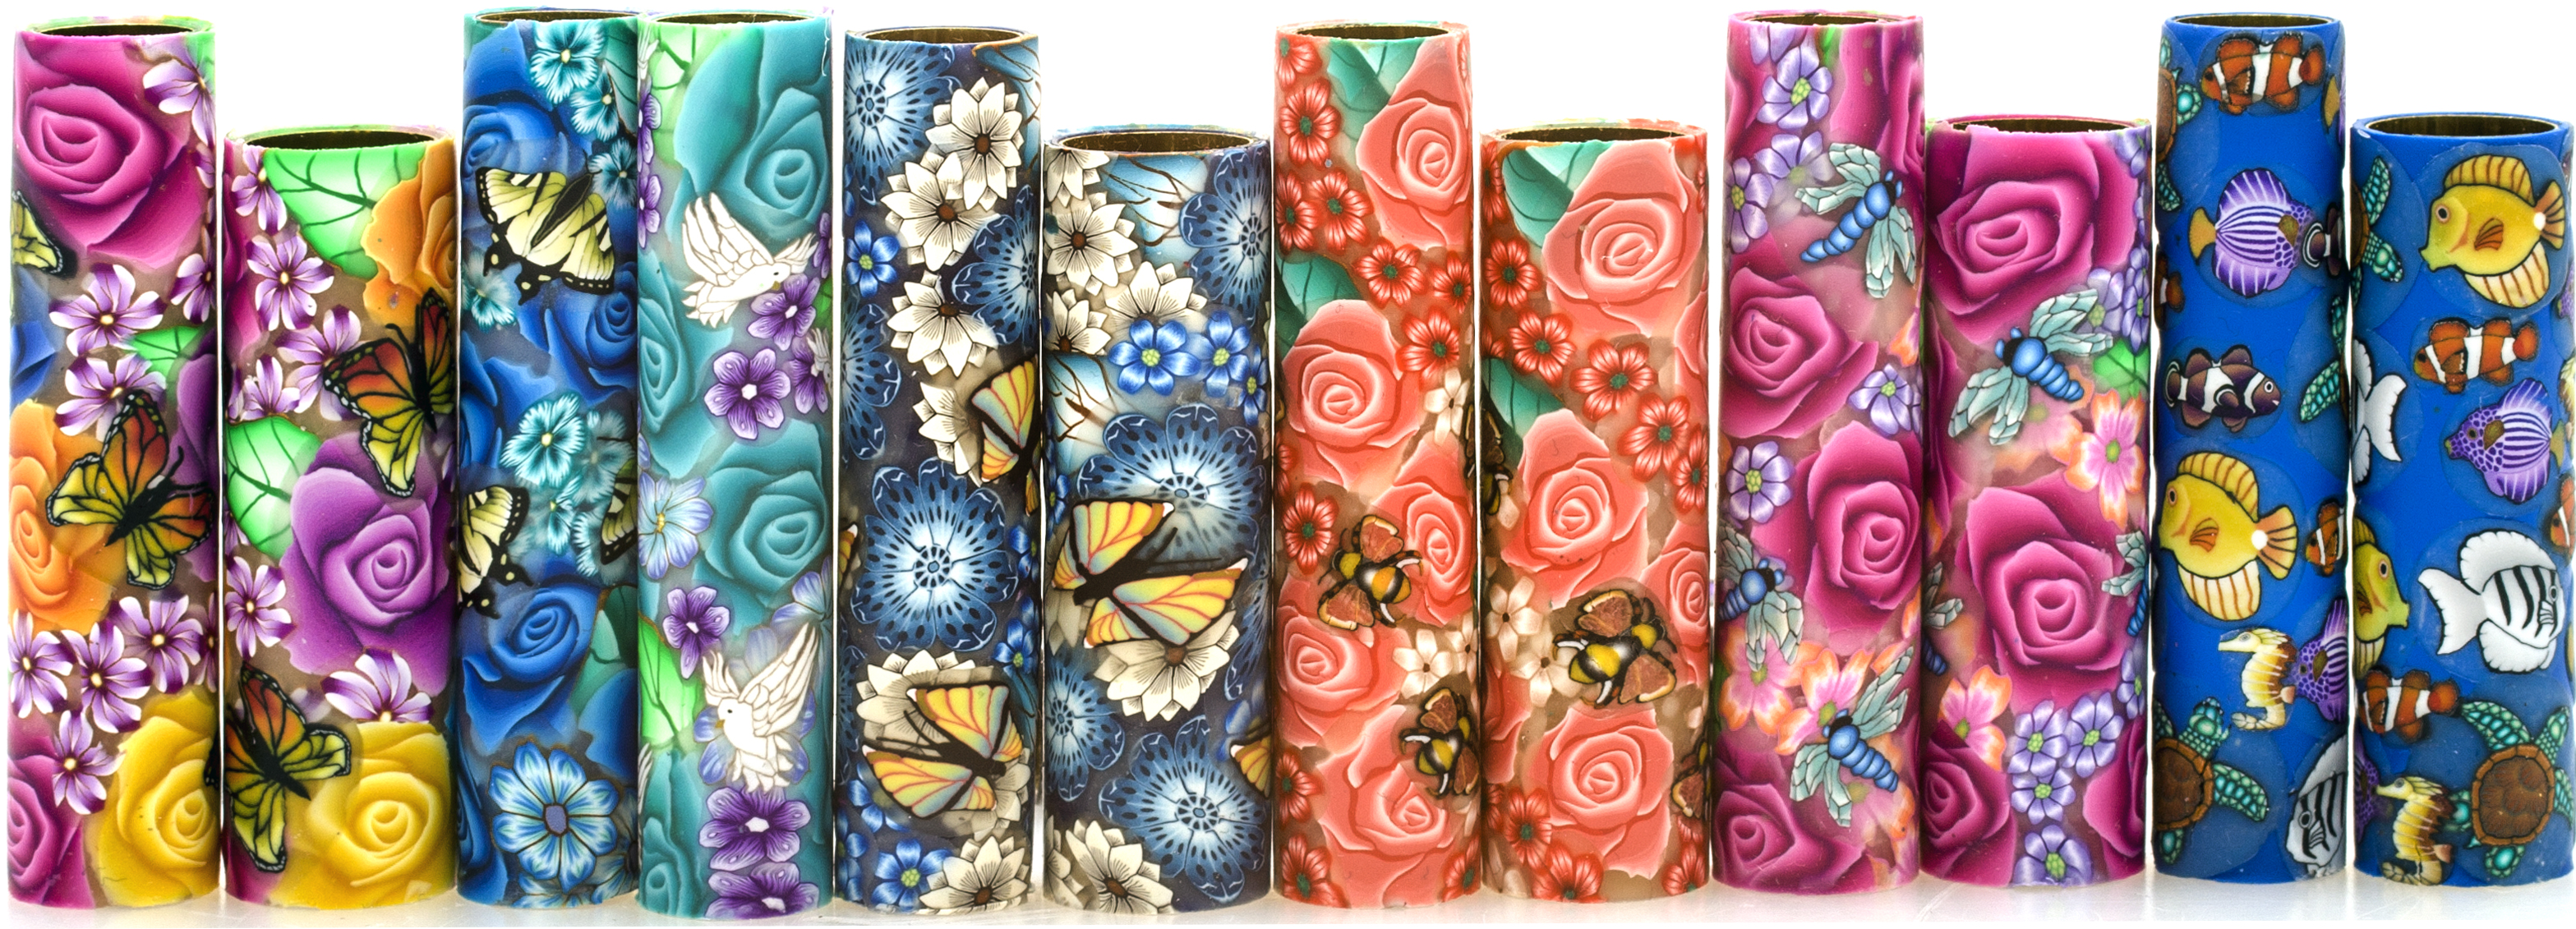 Polymer Clay Banners